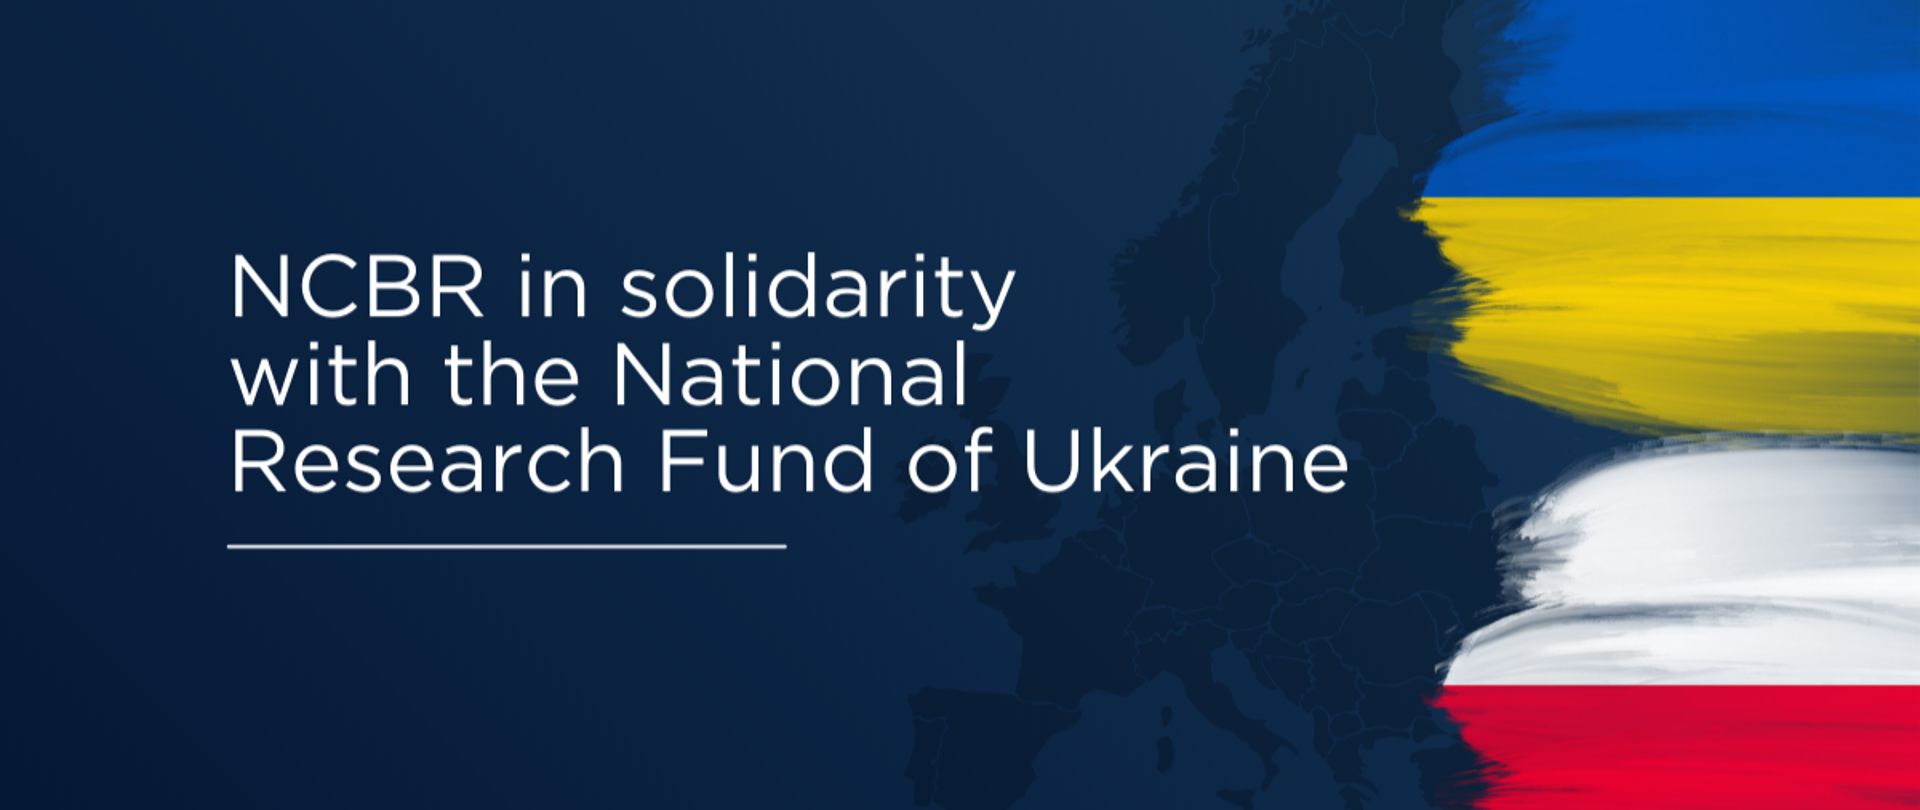 NCBR in solidarity with the National Research Fund of Ukraine